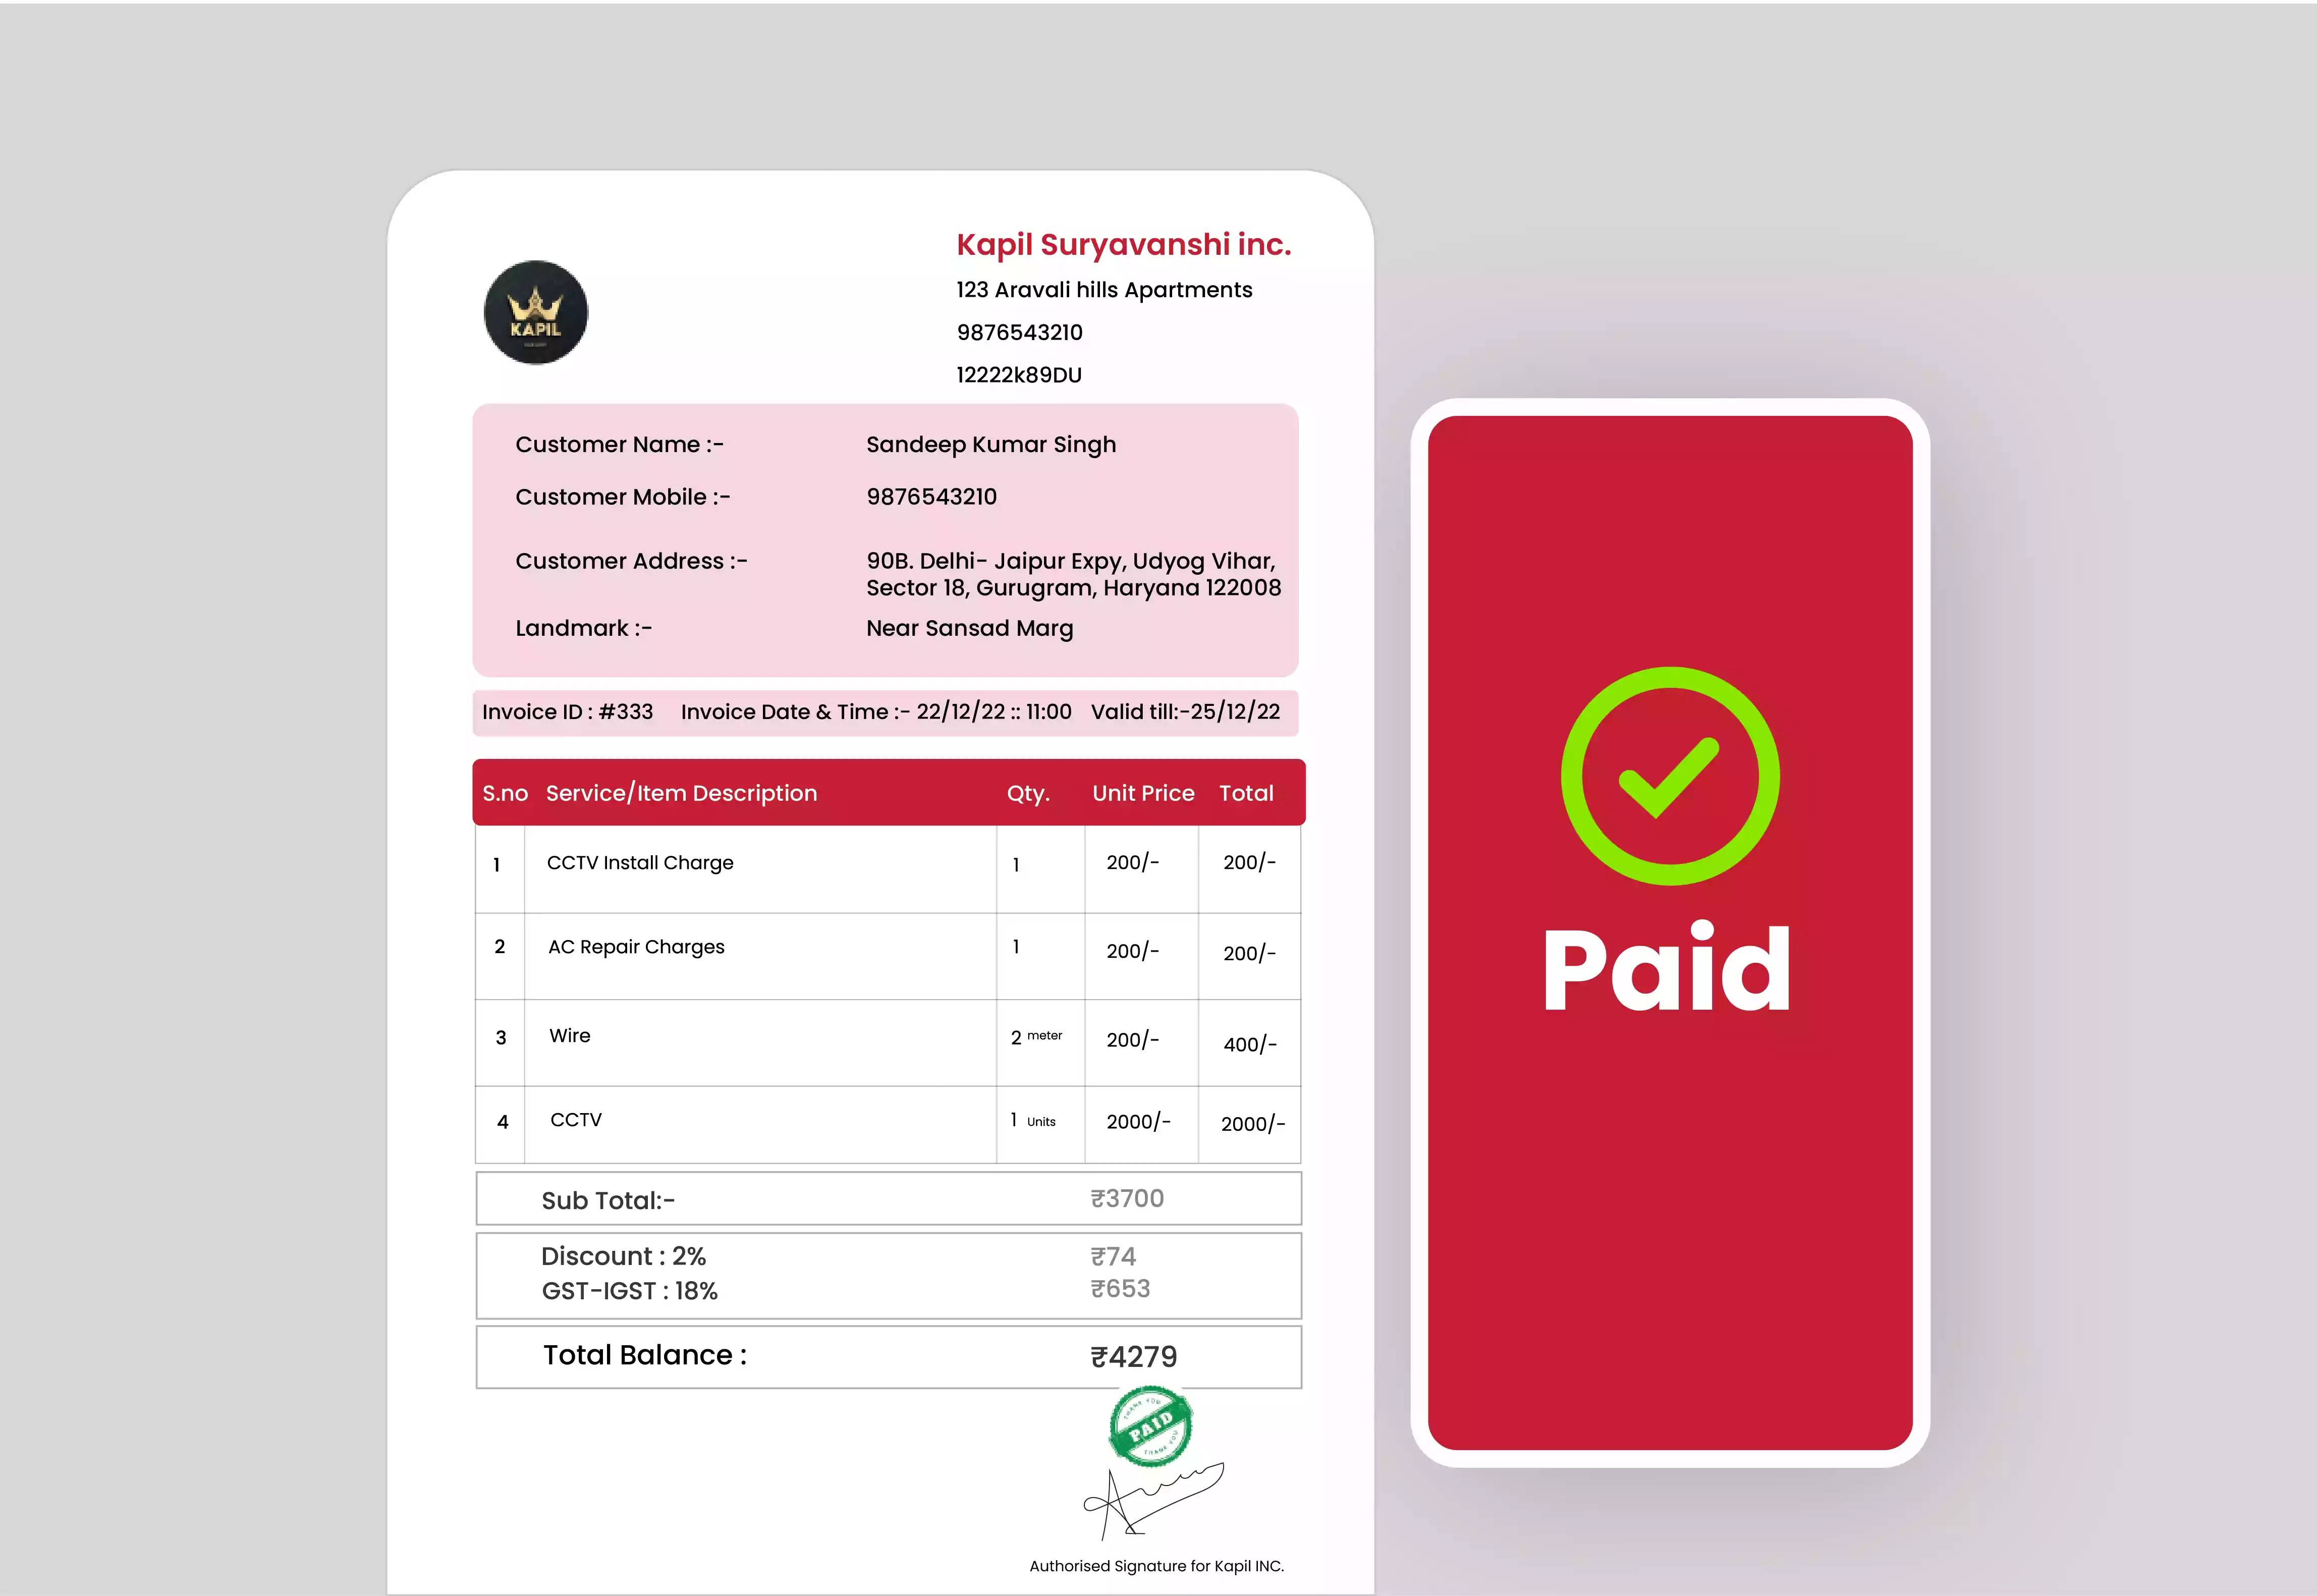 The image features a company logo at the top and an invoice displaying the customer's name, marked with a status of paid.